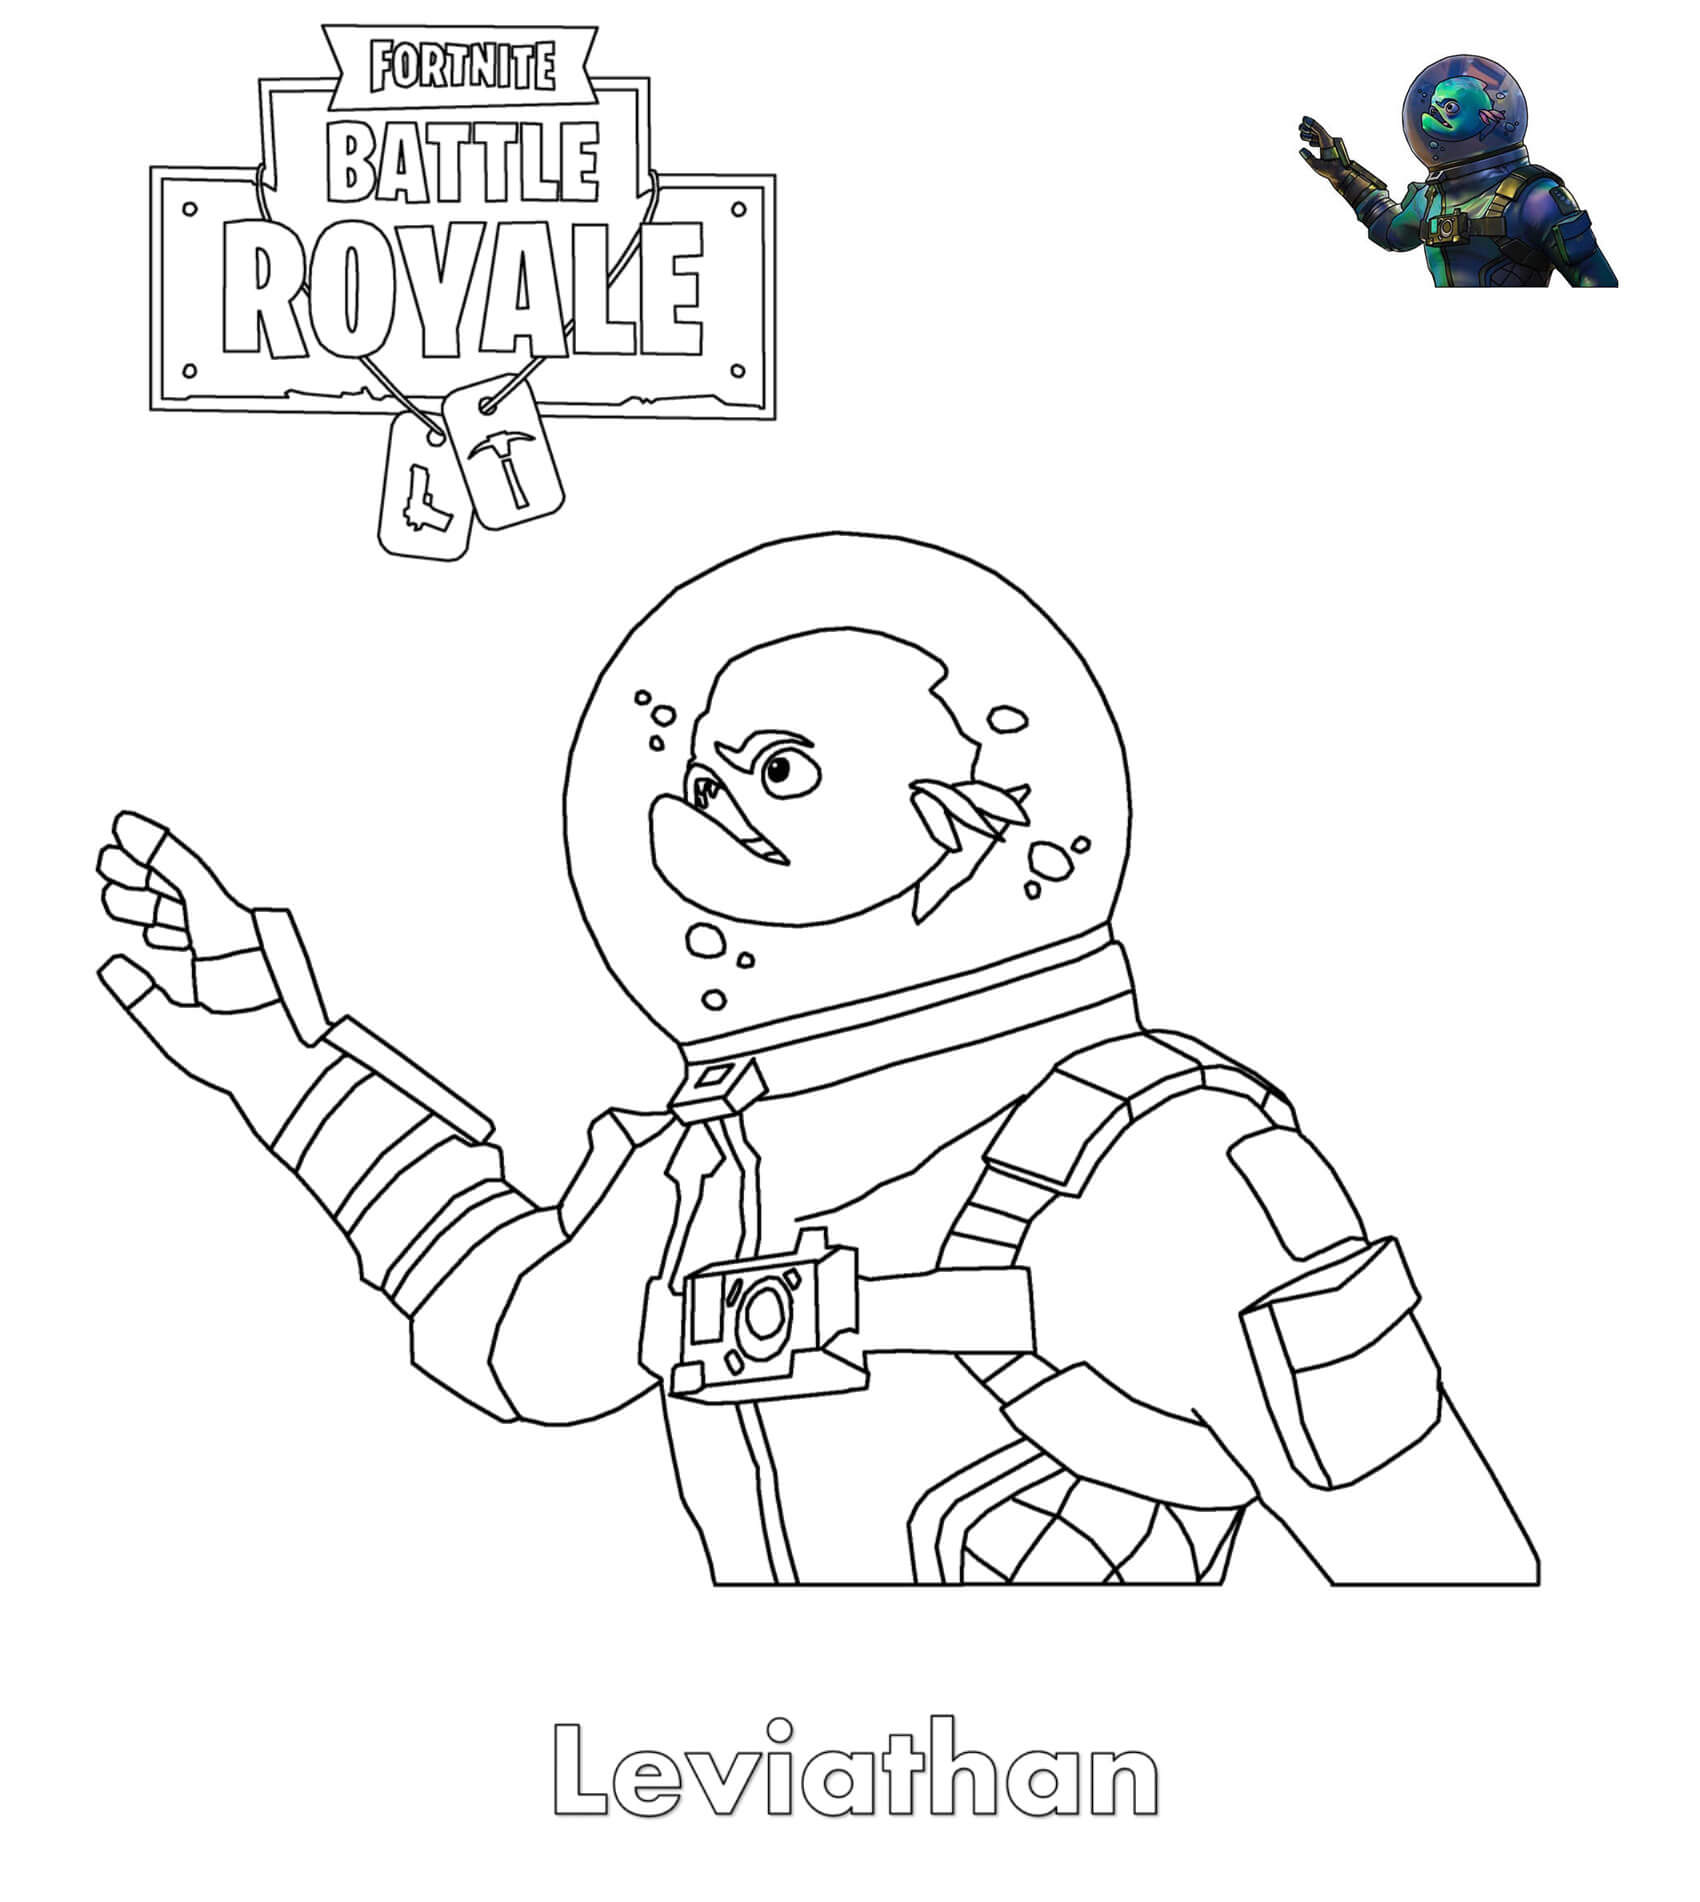 Fortnite Leviathan Skin Coloring Page